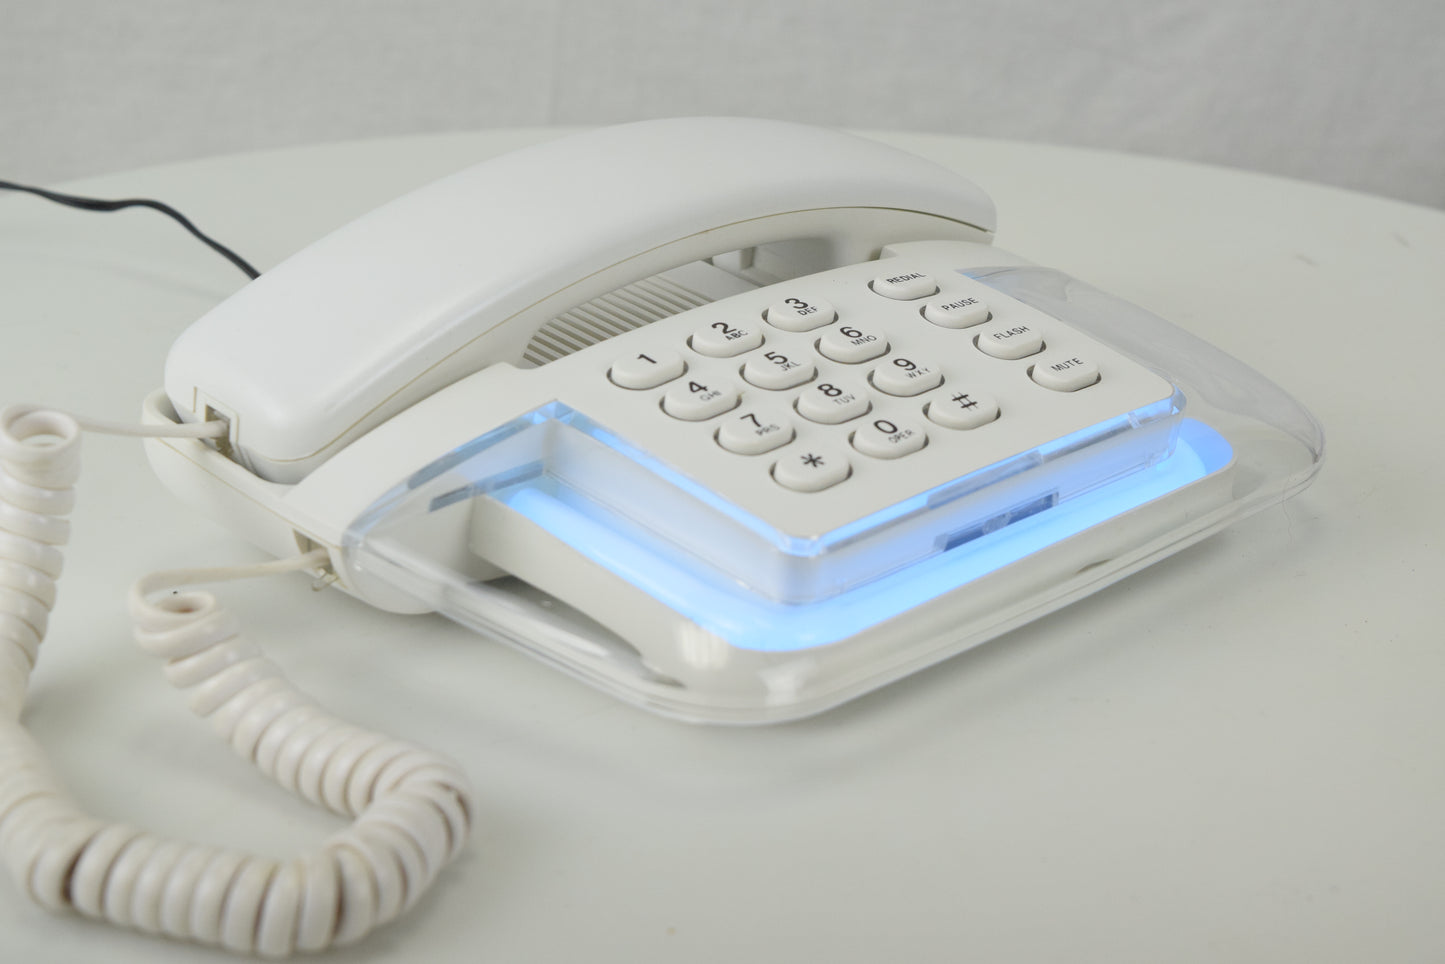 Neon Glow Telephone - White/Clear with Blue Light